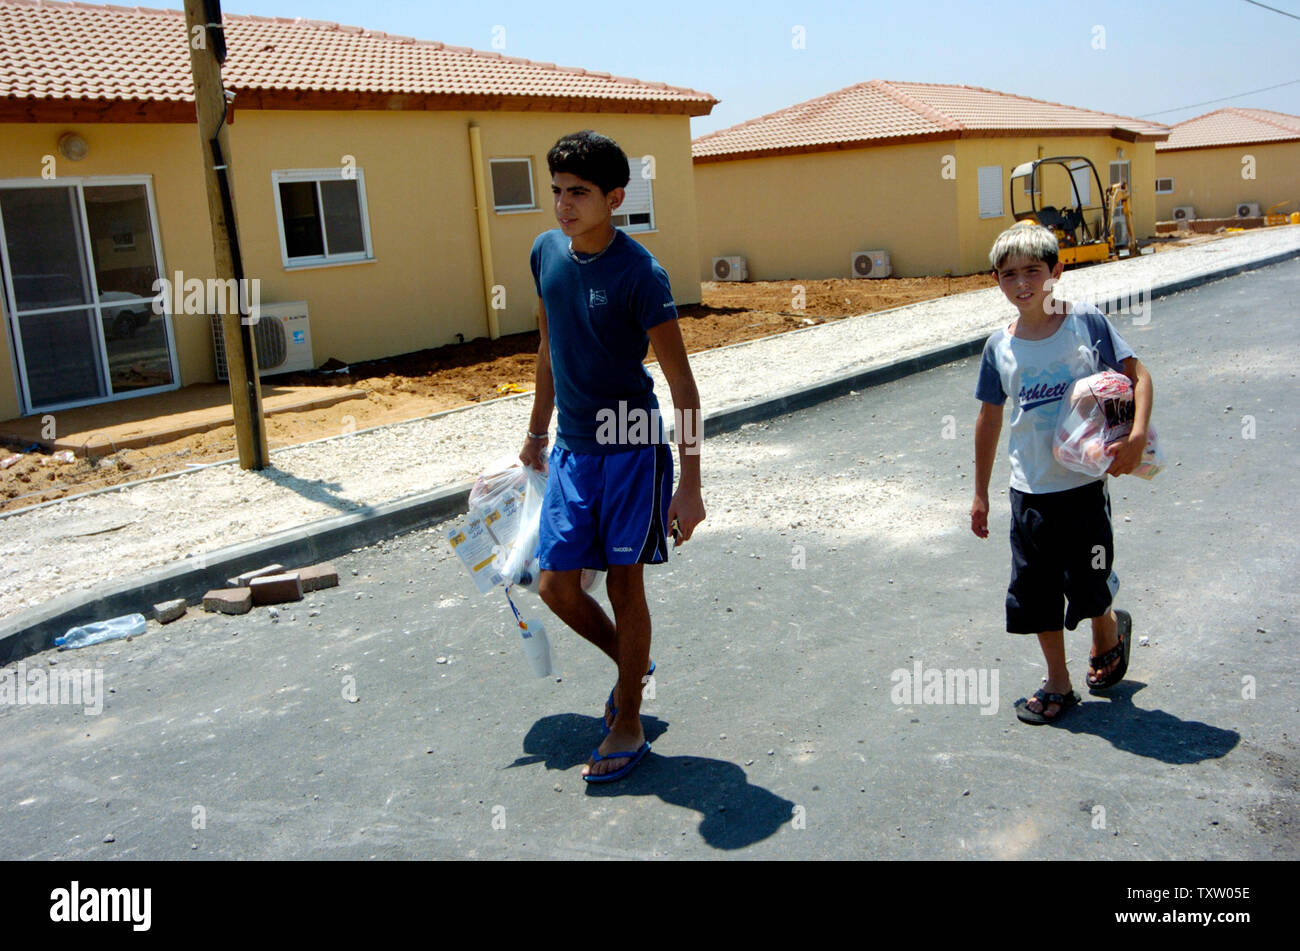 Israeli settler boys from Nisanit in the Gaza Strip, walk by new mobile home in Nitzan, in southern Israel, August 1, 2005.  The temporary housing is provided  by the government for Israeli settlers who want to move before the upcoming disengagement from the Gaza Strip. Israeli Prime Minister Ariel Sharon said that over half of the eligible residents of the Gaza Strip have filled out applications to receive compensation from the disengagement authority. (UPI Photo/Debbie Hill) Stock Photo